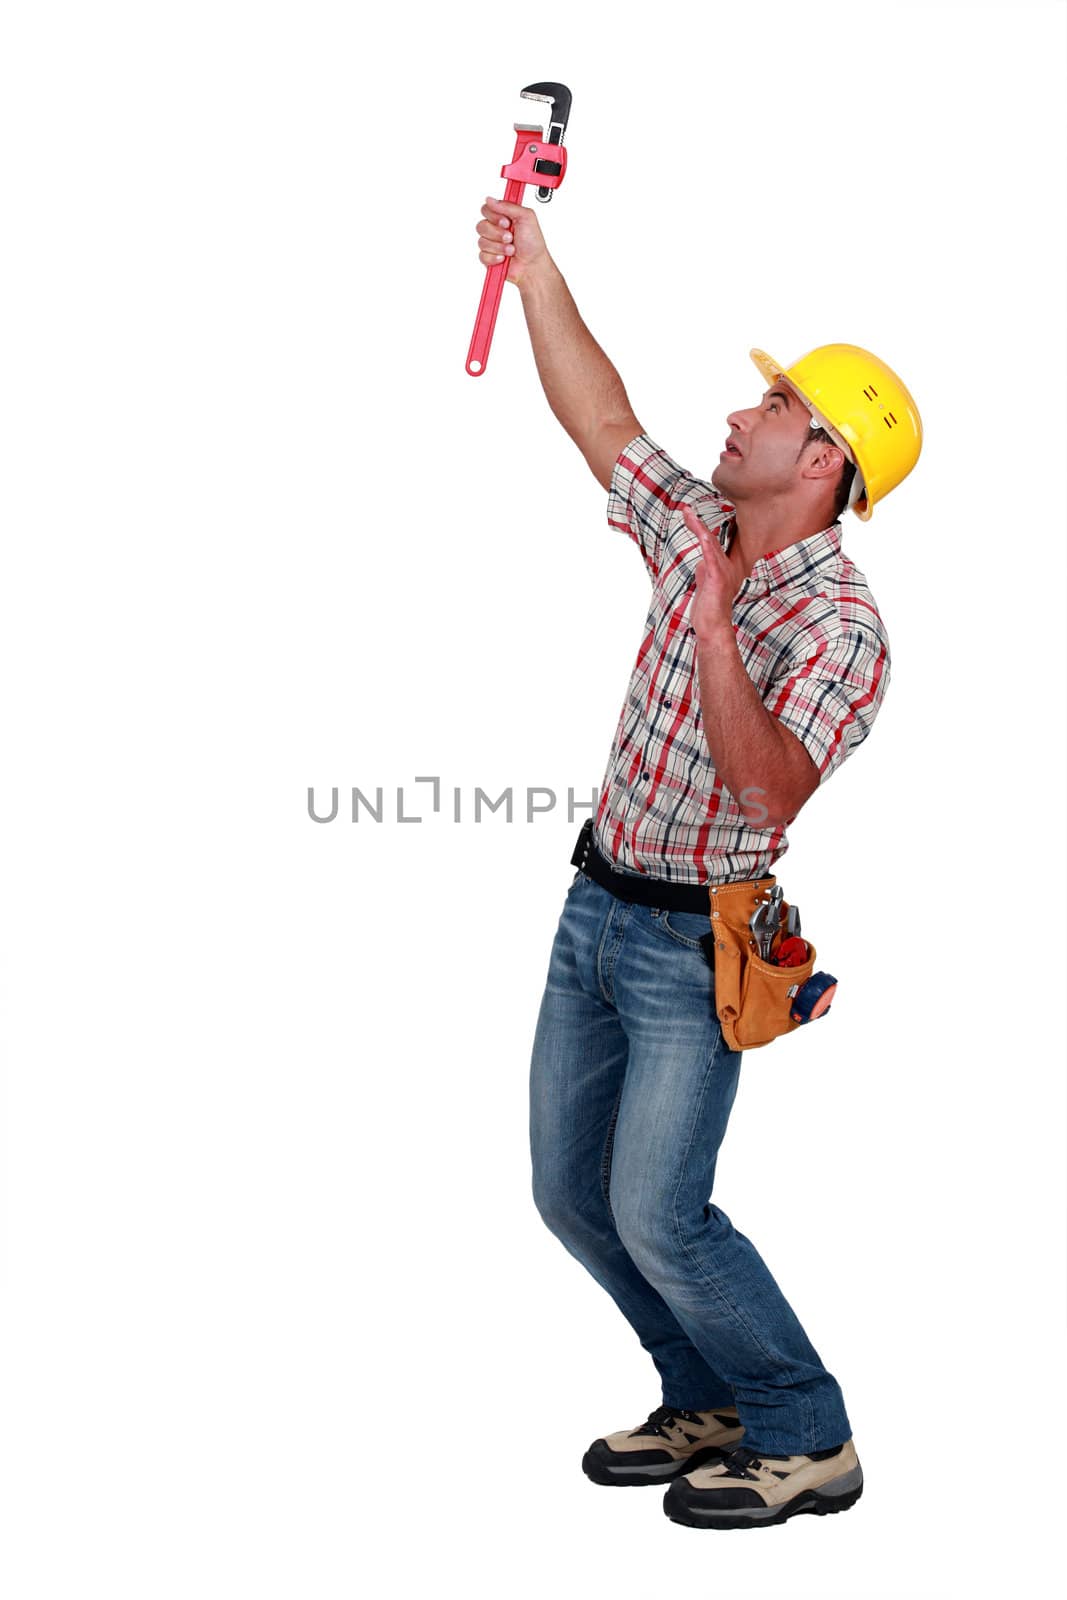 Tradesman using a pipe wrench to tighten an object by phovoir